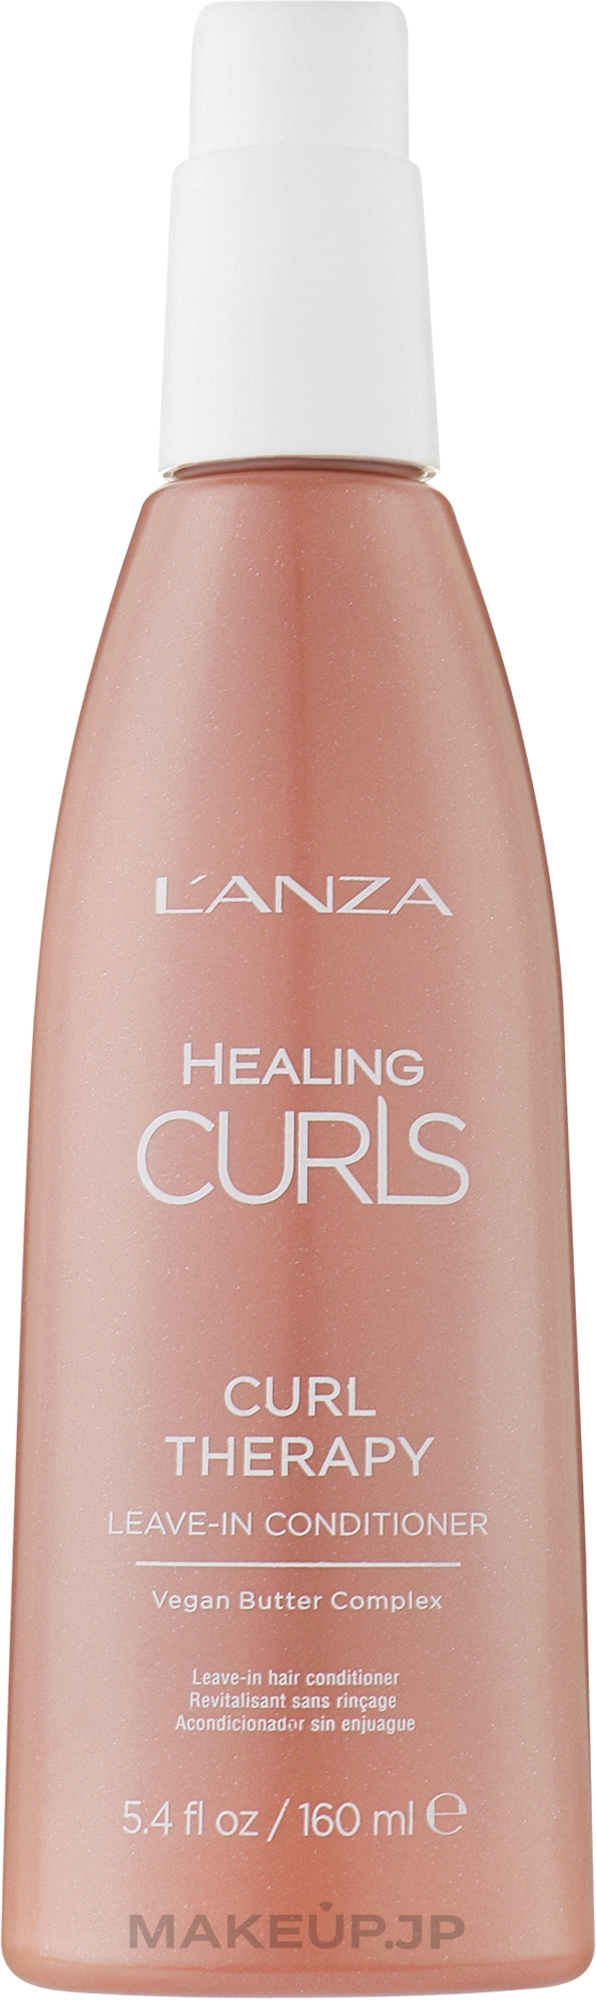 Leave-In Moisturizing Conditioner - L'anza Curls Curl Therapy Leave-In Moisturizer — photo 160 ml